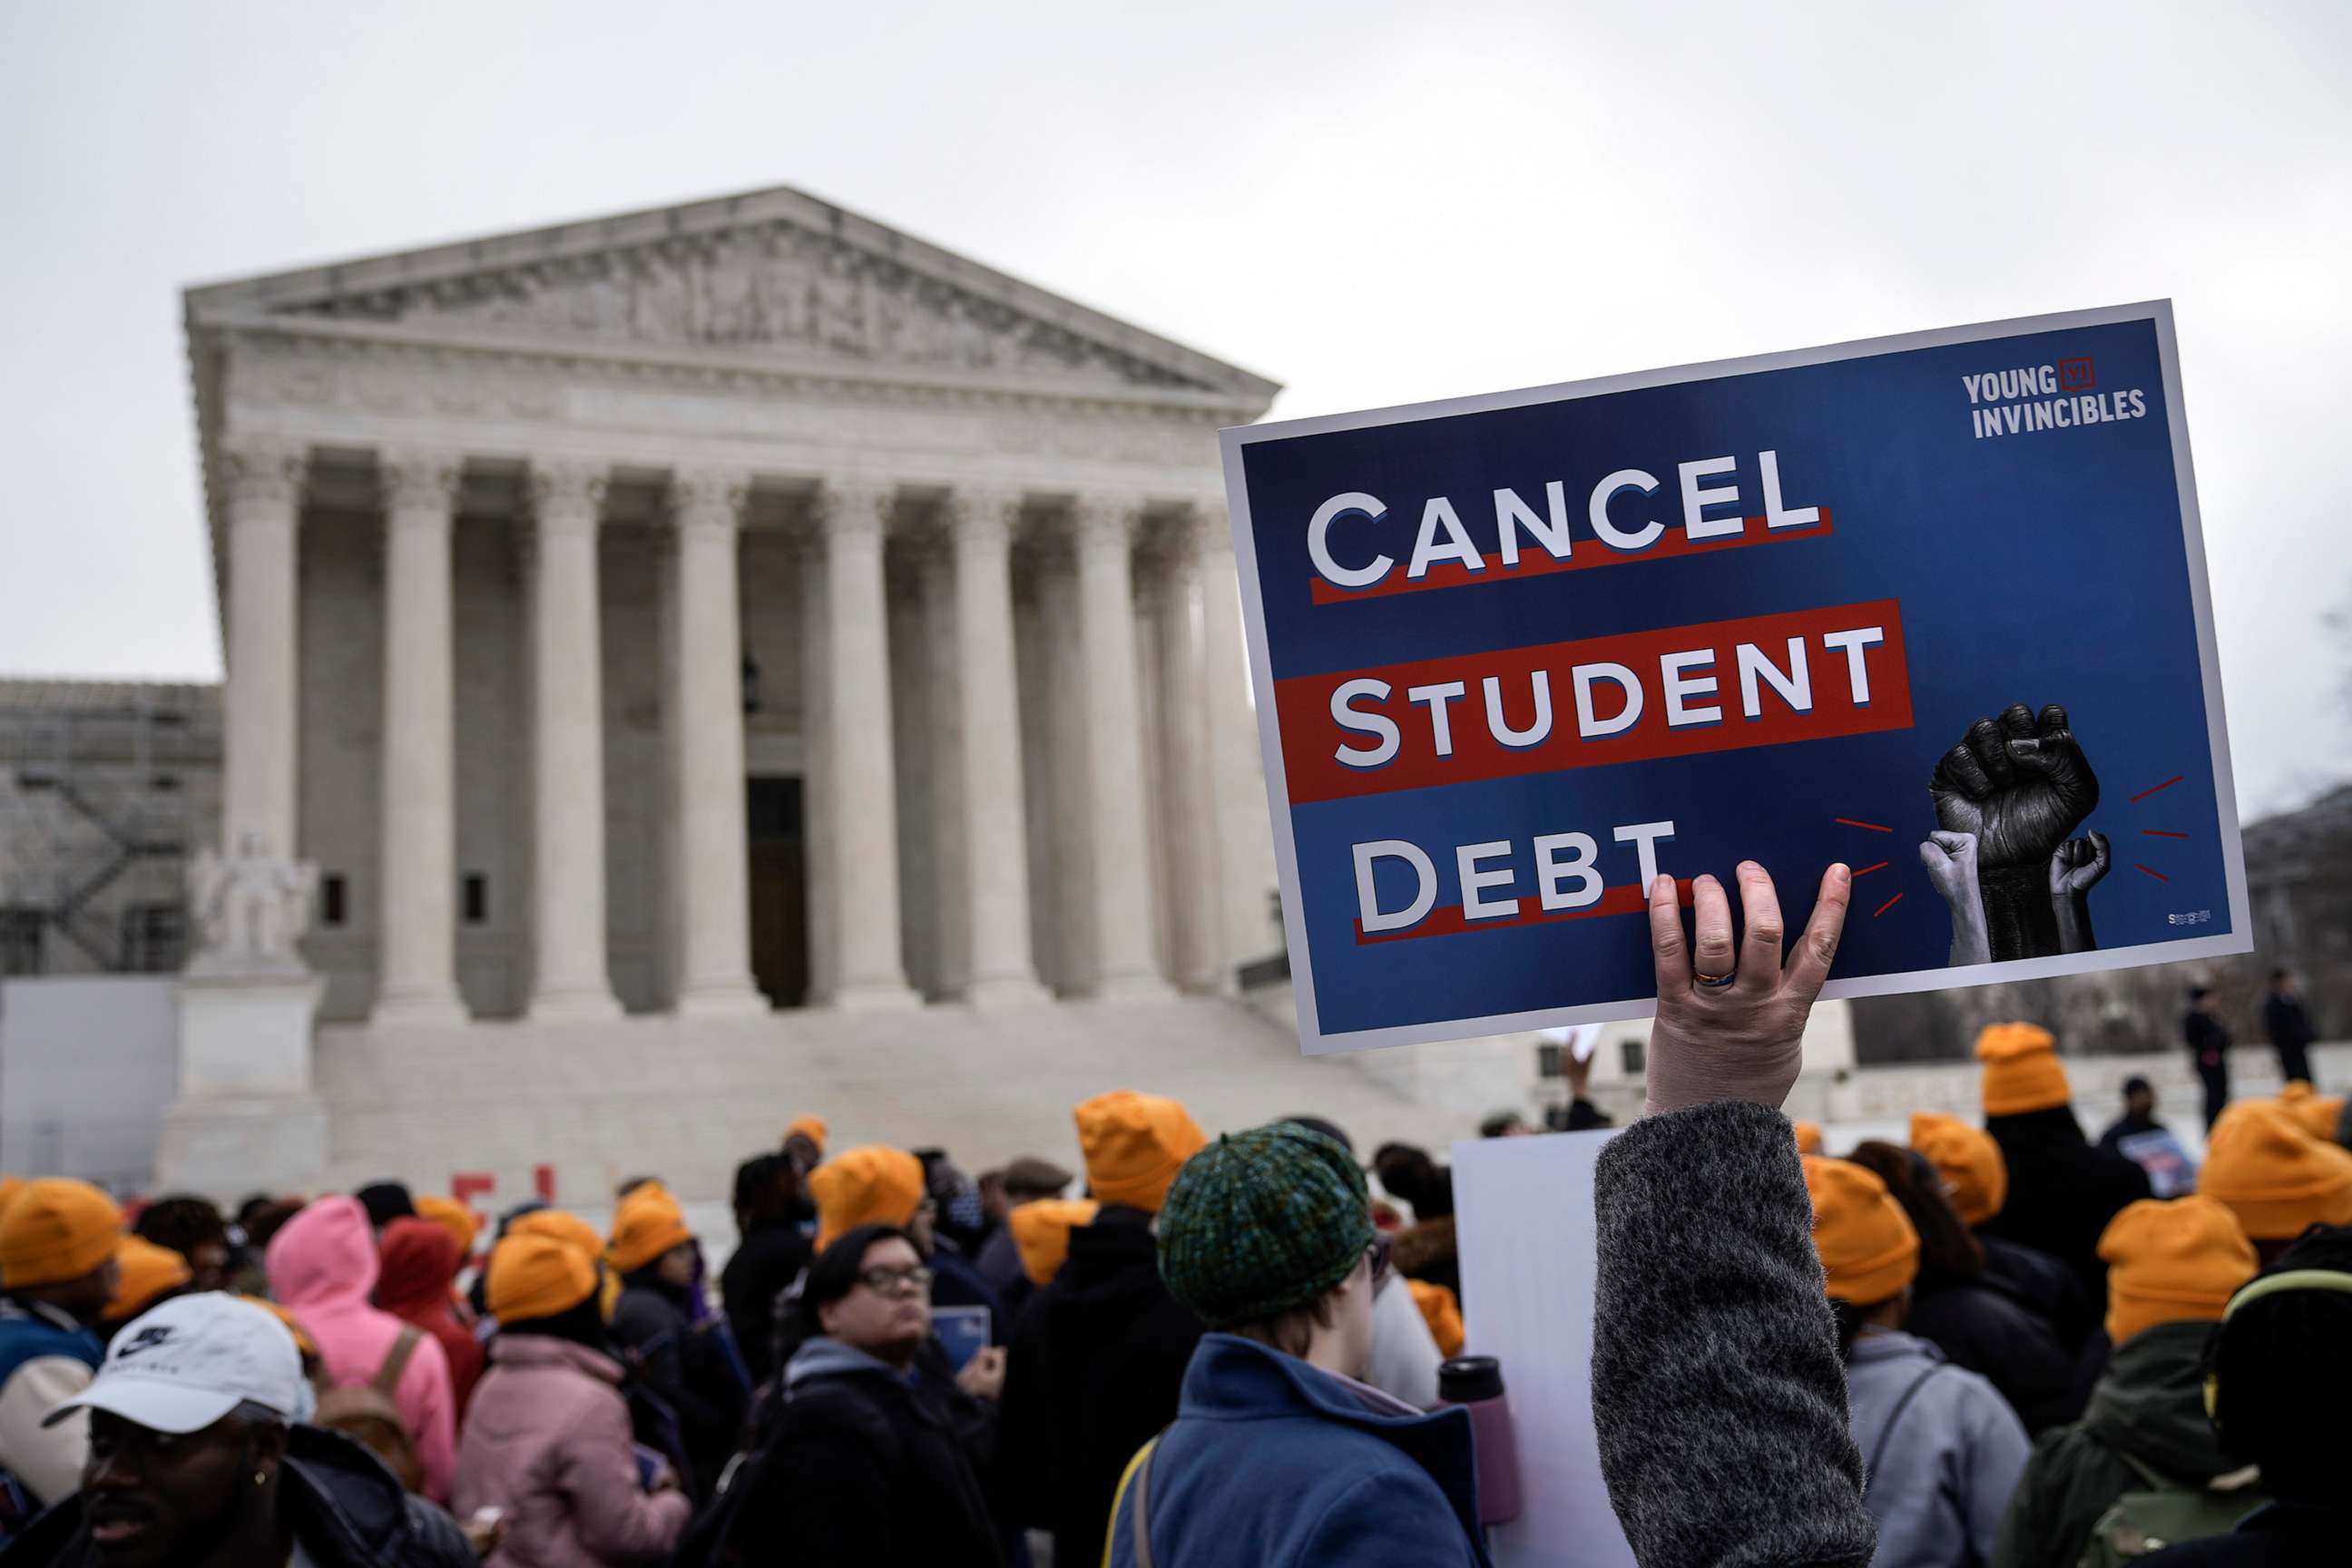 PHOTO: In this Feb. 28, 2023, file photo, people rally in support of the Biden administration's student debt relief plan in front of the the Supreme Court, in Washington, D.C.